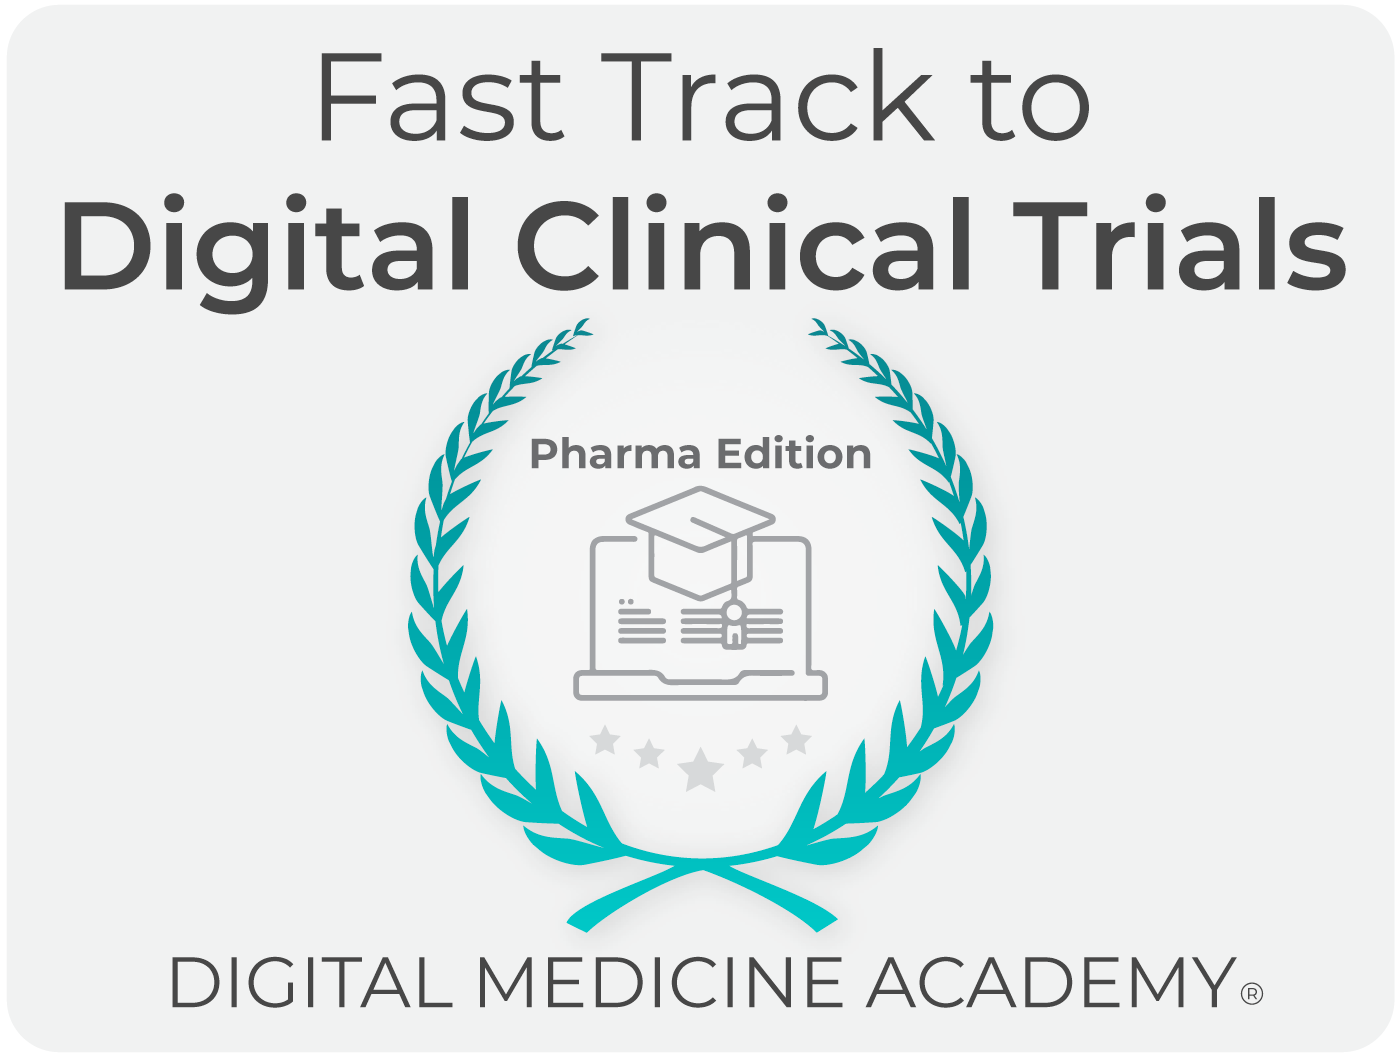 Digital Medicine Academy course logo--an image of a laptop with a motorboard surrounded by the course name "Fast Track to Digital Clinical Trials For Pharma"